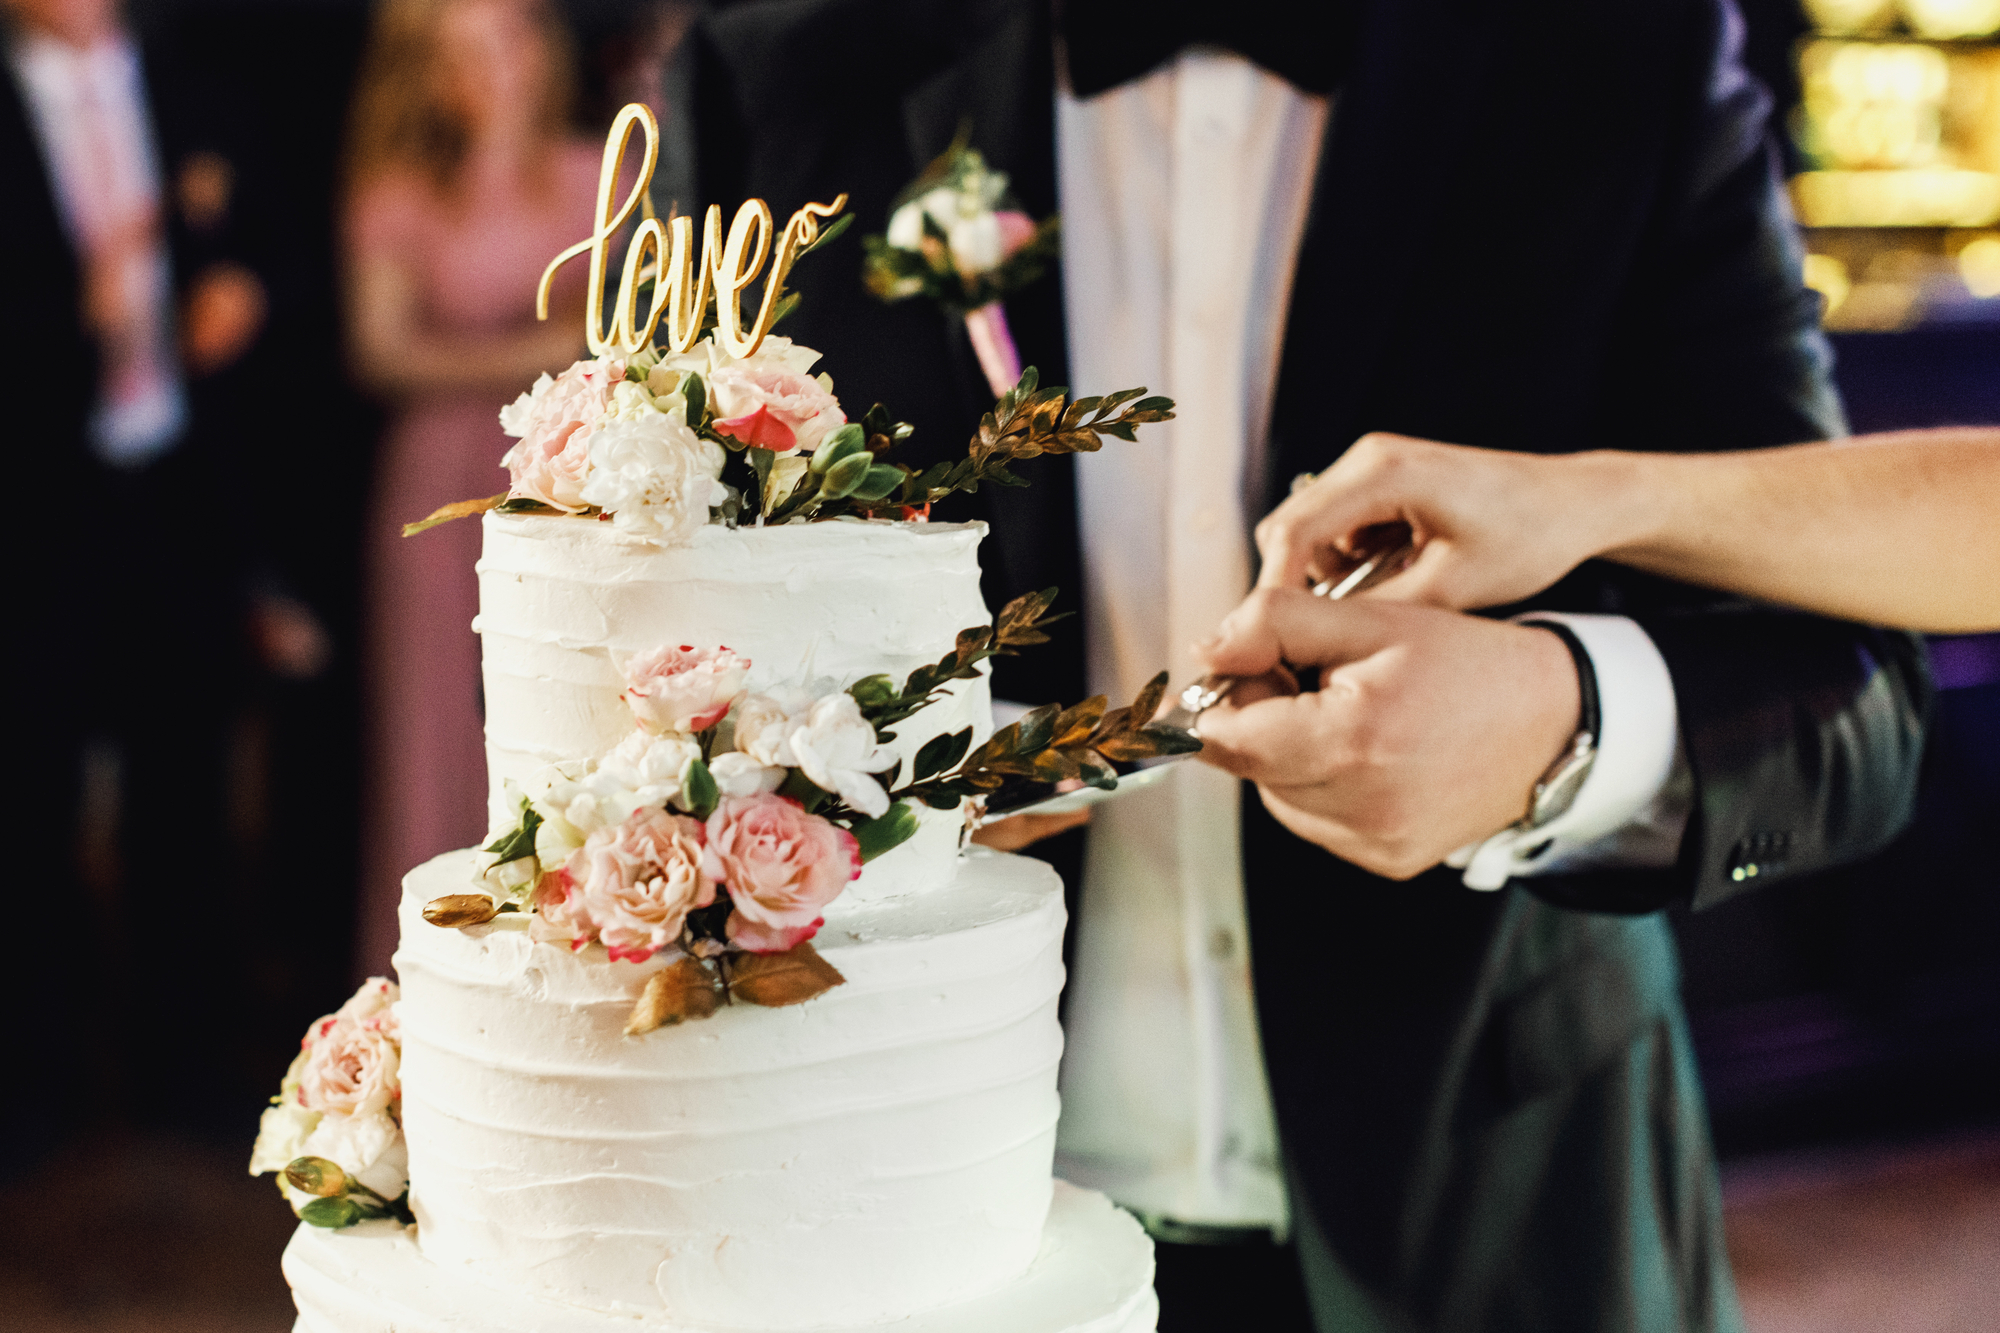 The 20 Best Cake Cutting Songs for Your Wedding Day